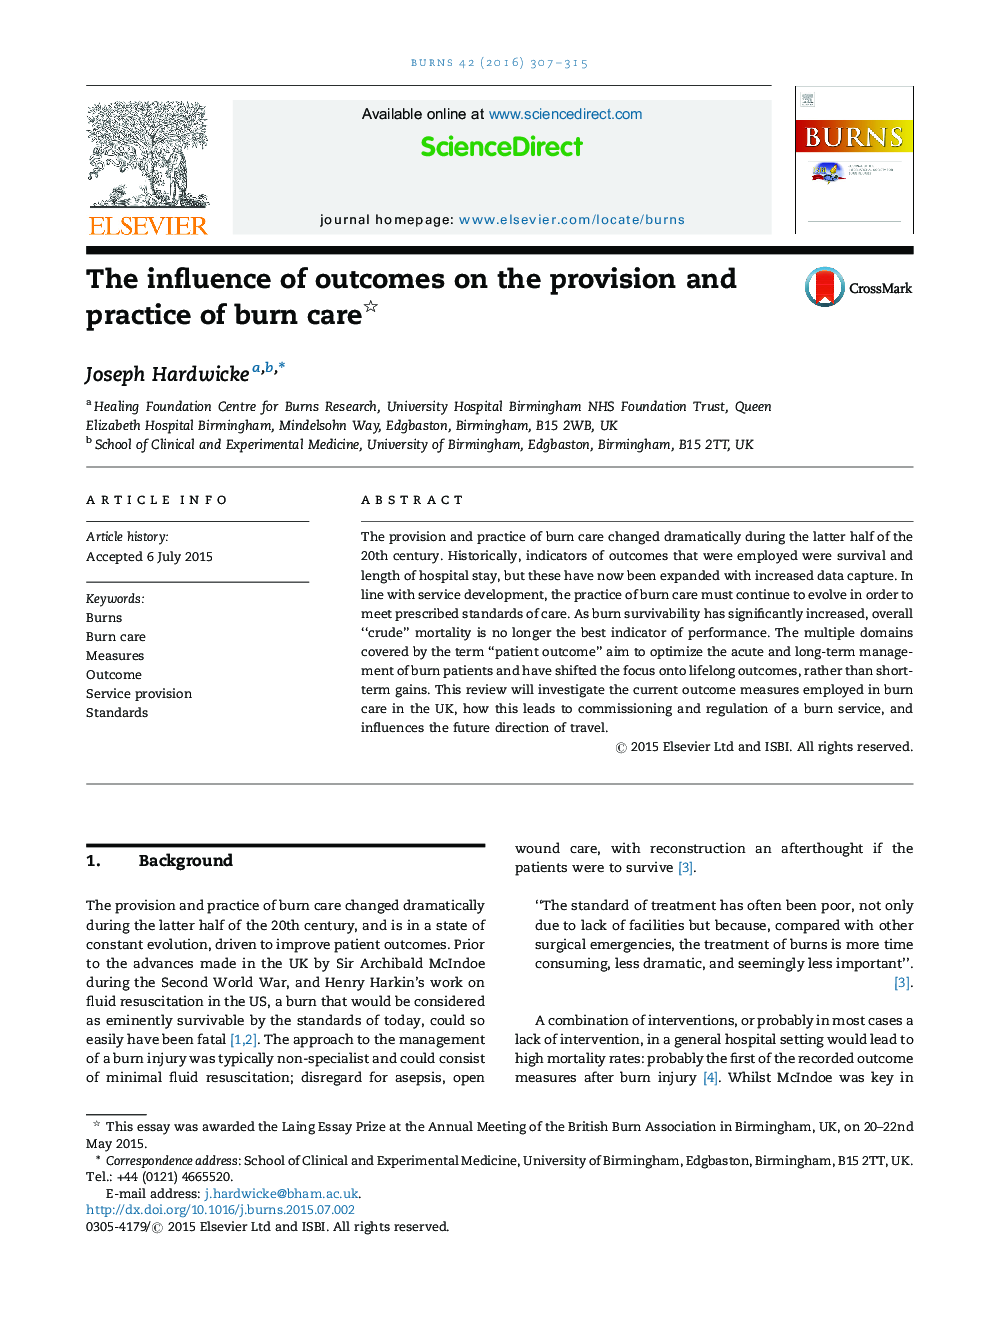 The influence of outcomes on the provision and practice of burn care 